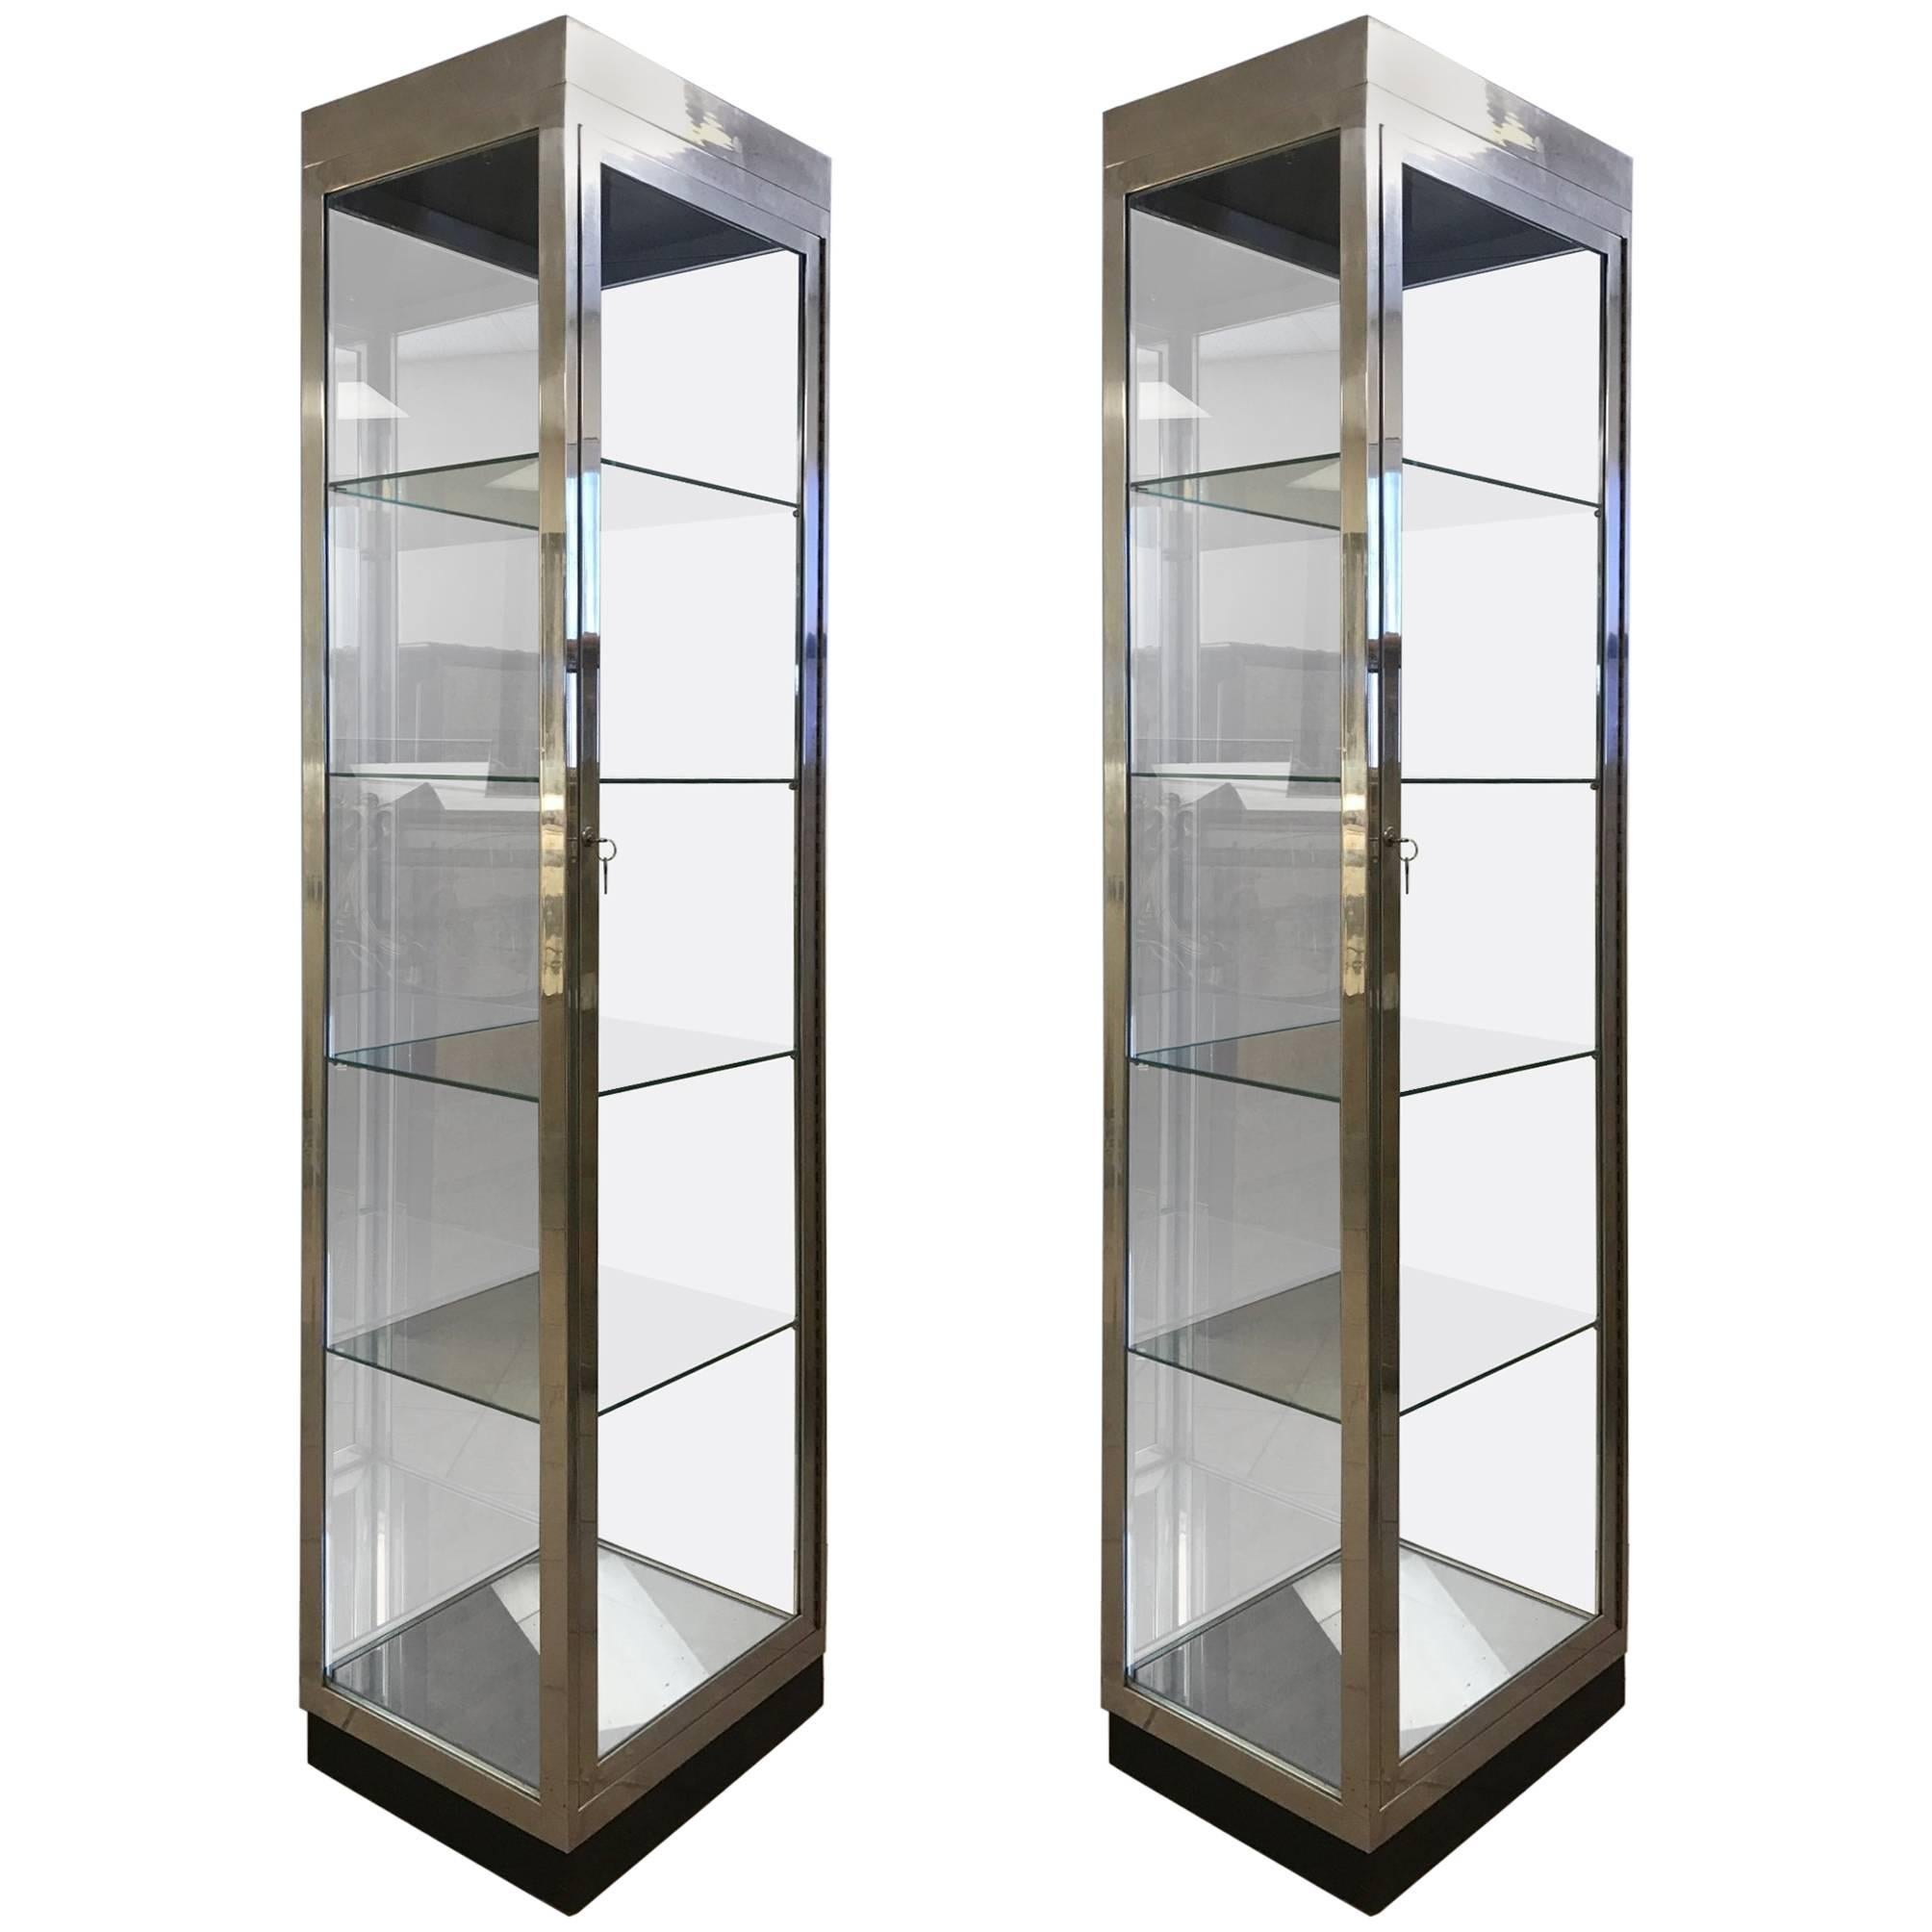 Pair of Vintage Aluminium and Glass Display Cabinets